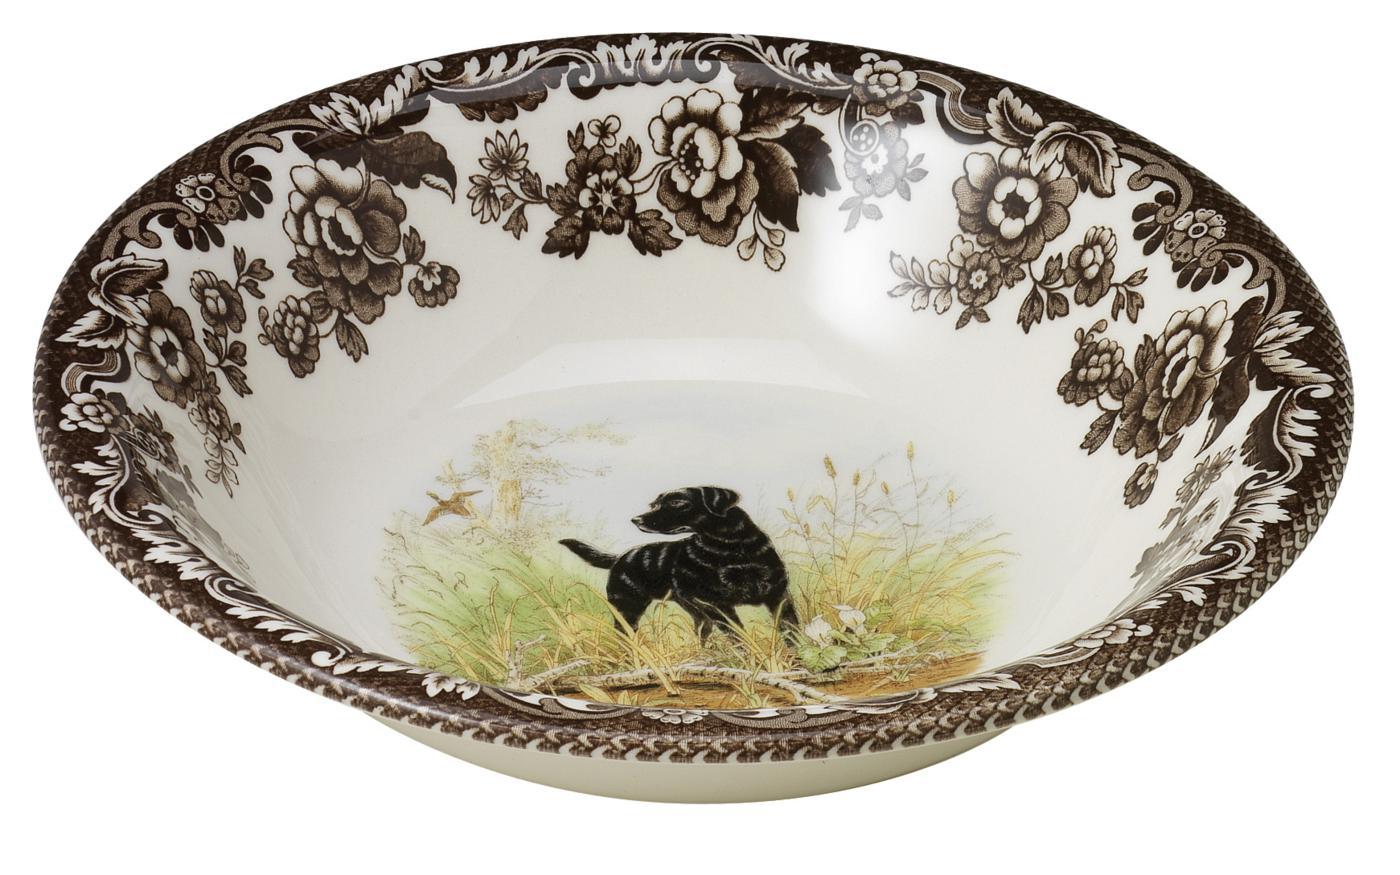 Woodland Ascot Cereal Bowl 8 Inch, Black Labrador Retriever image number null